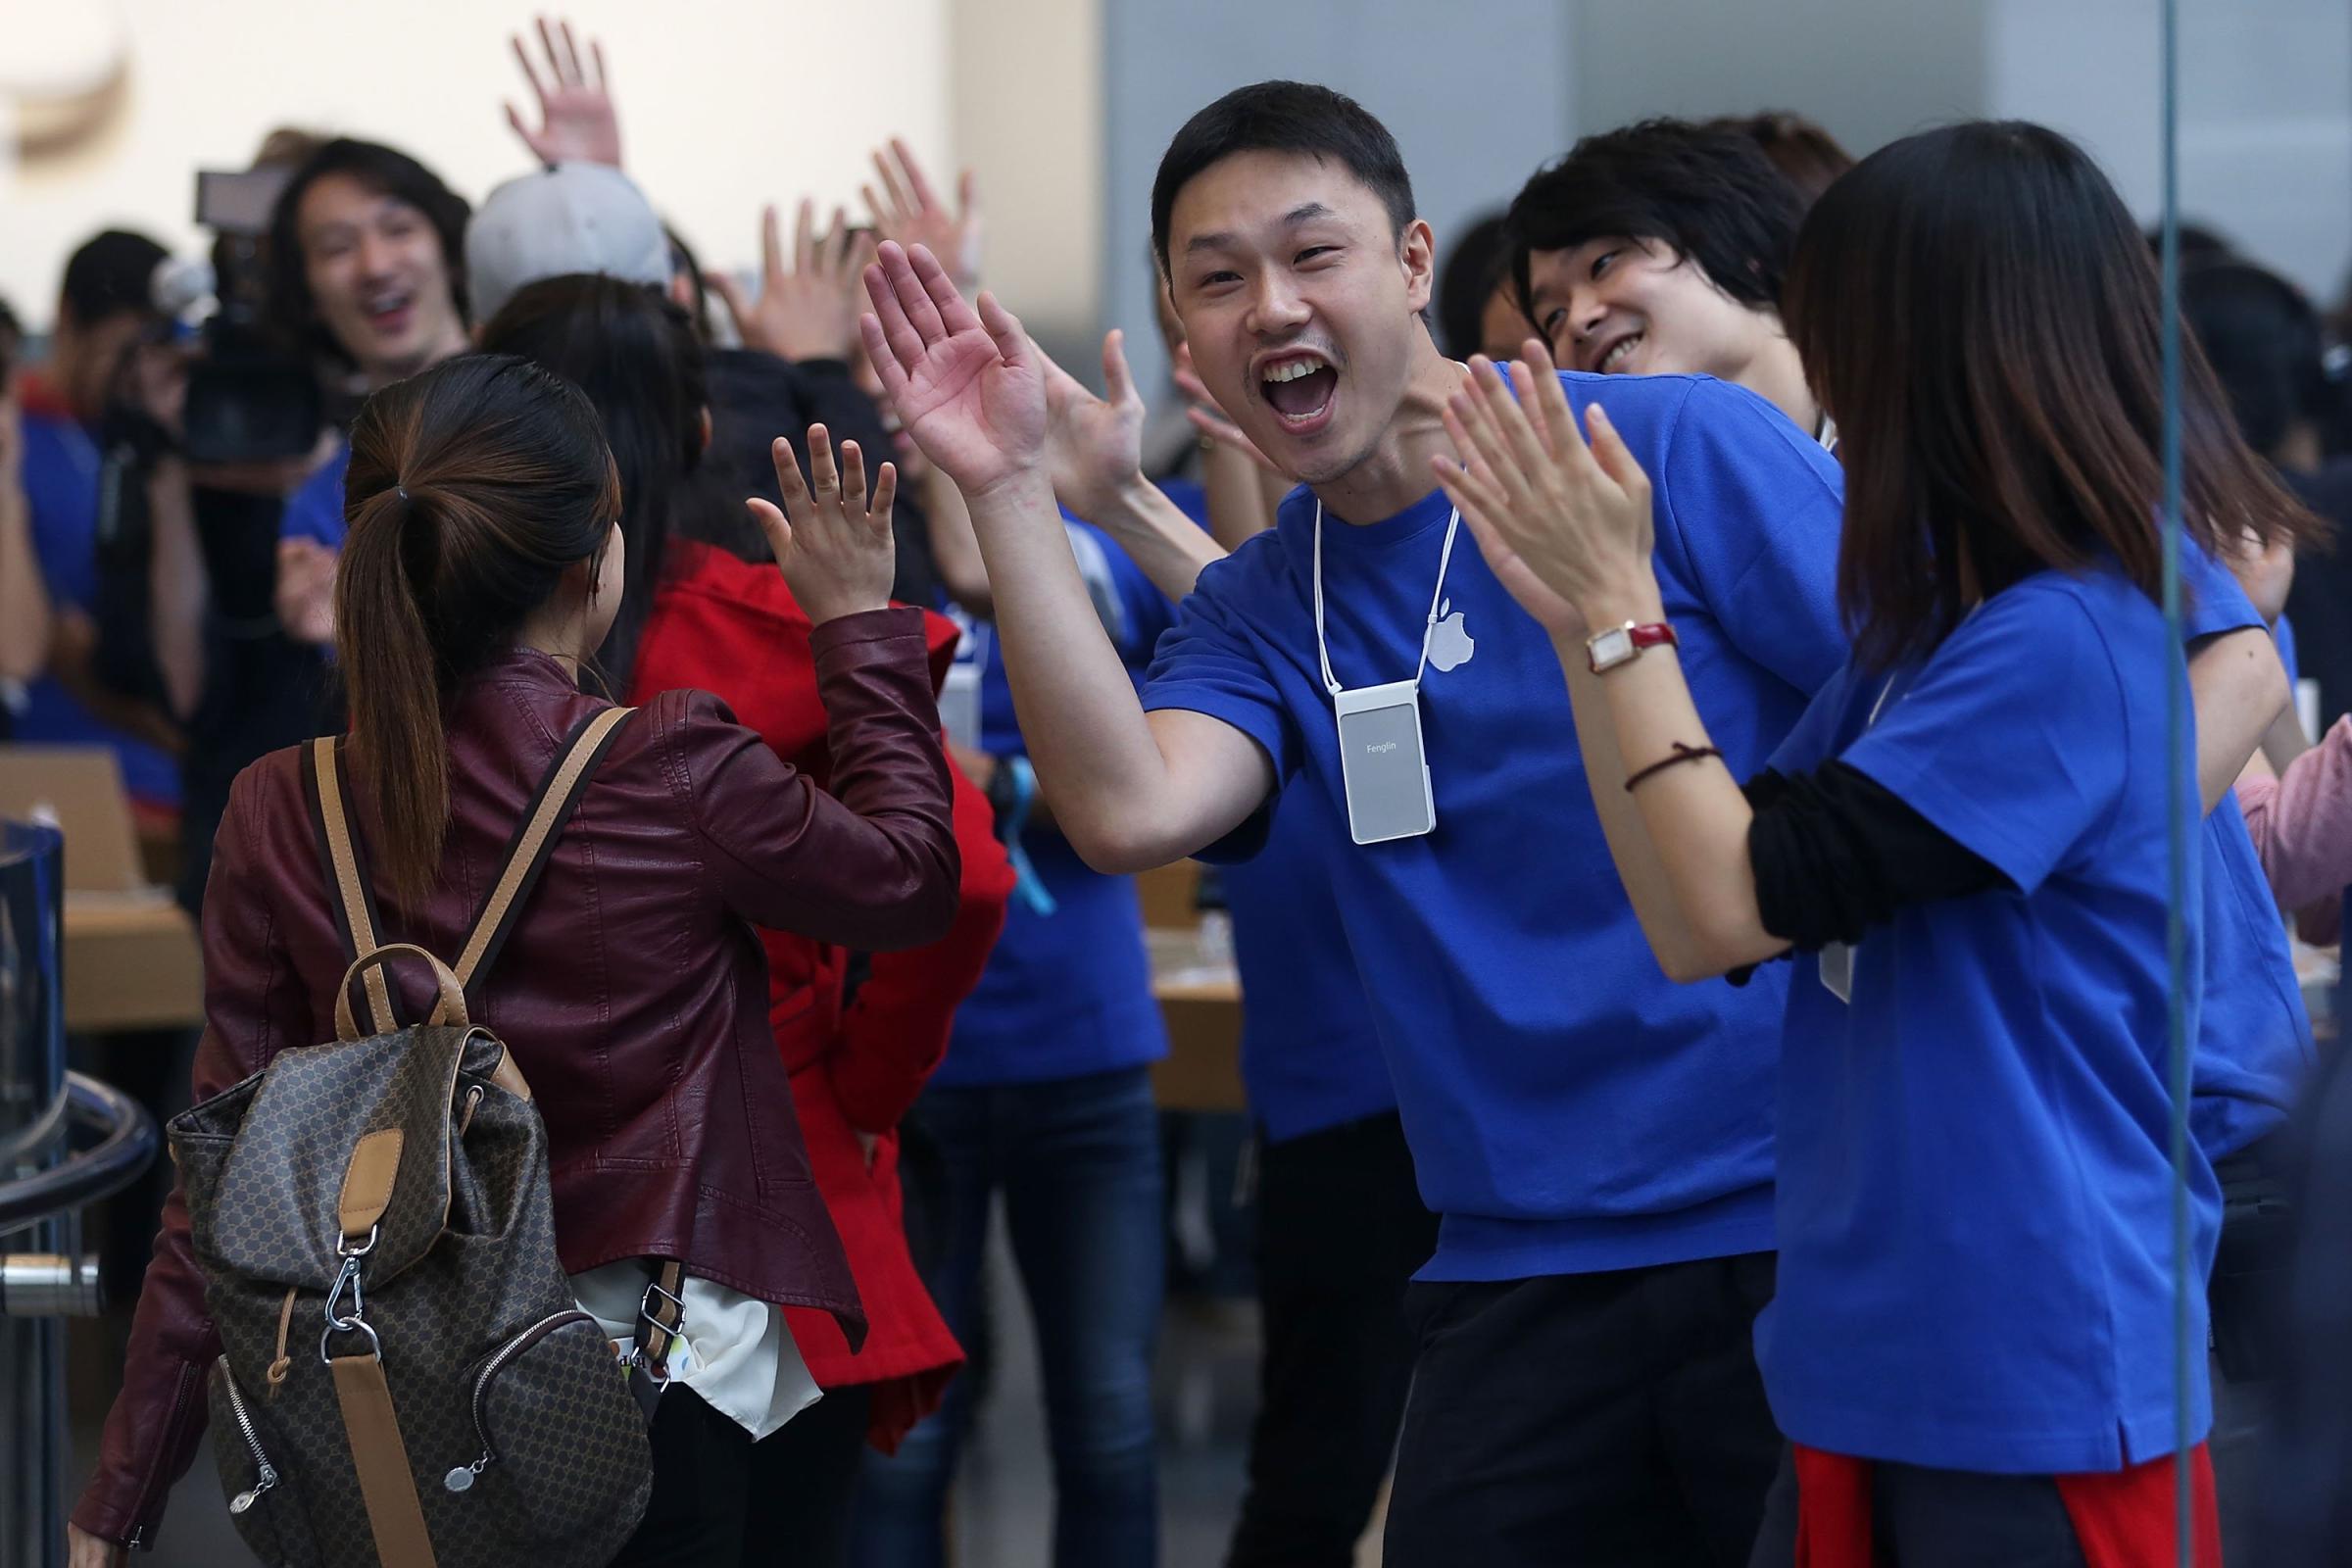 Apple store staff high five customers as they enter the store in Tokyo on Sept. 19, 2014.